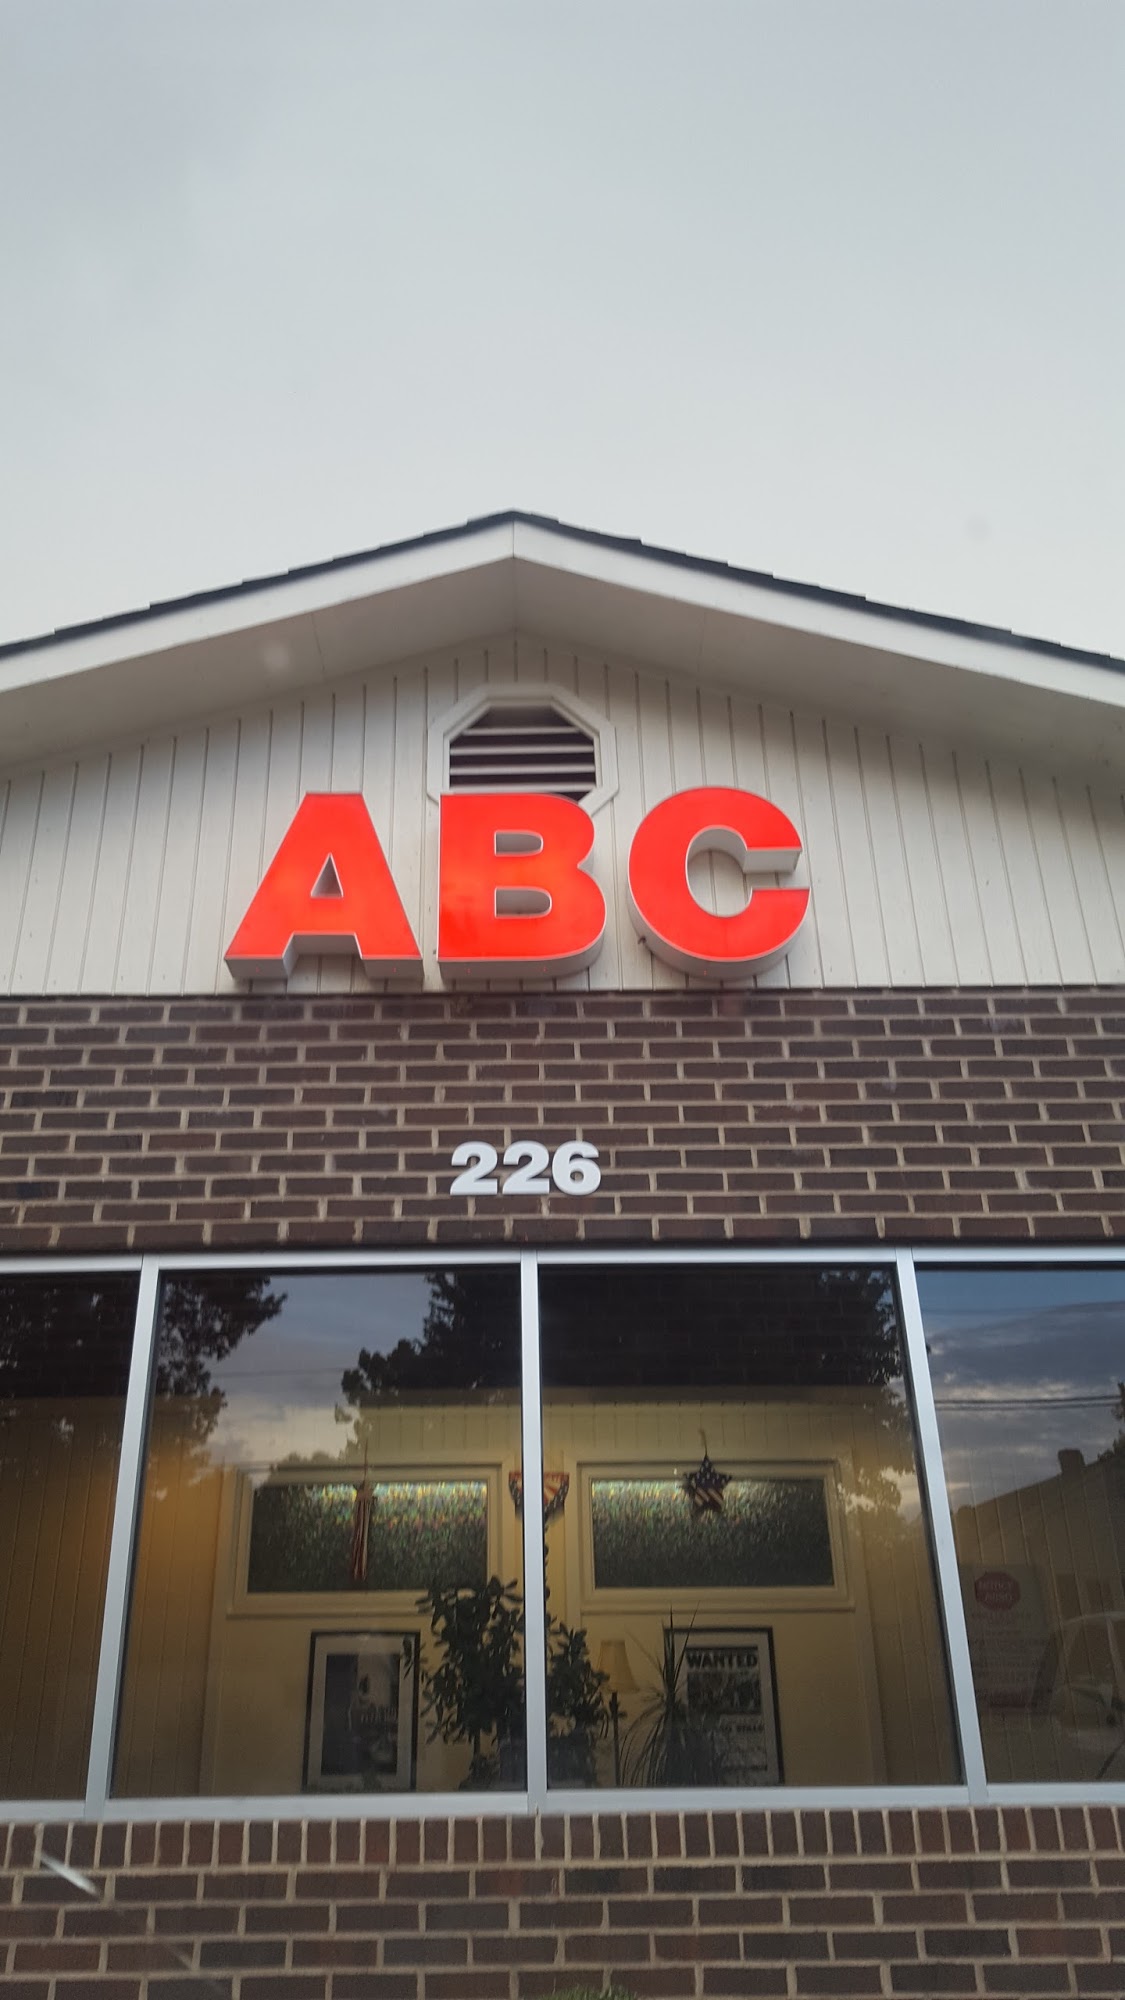 Mount Airy ABC Store